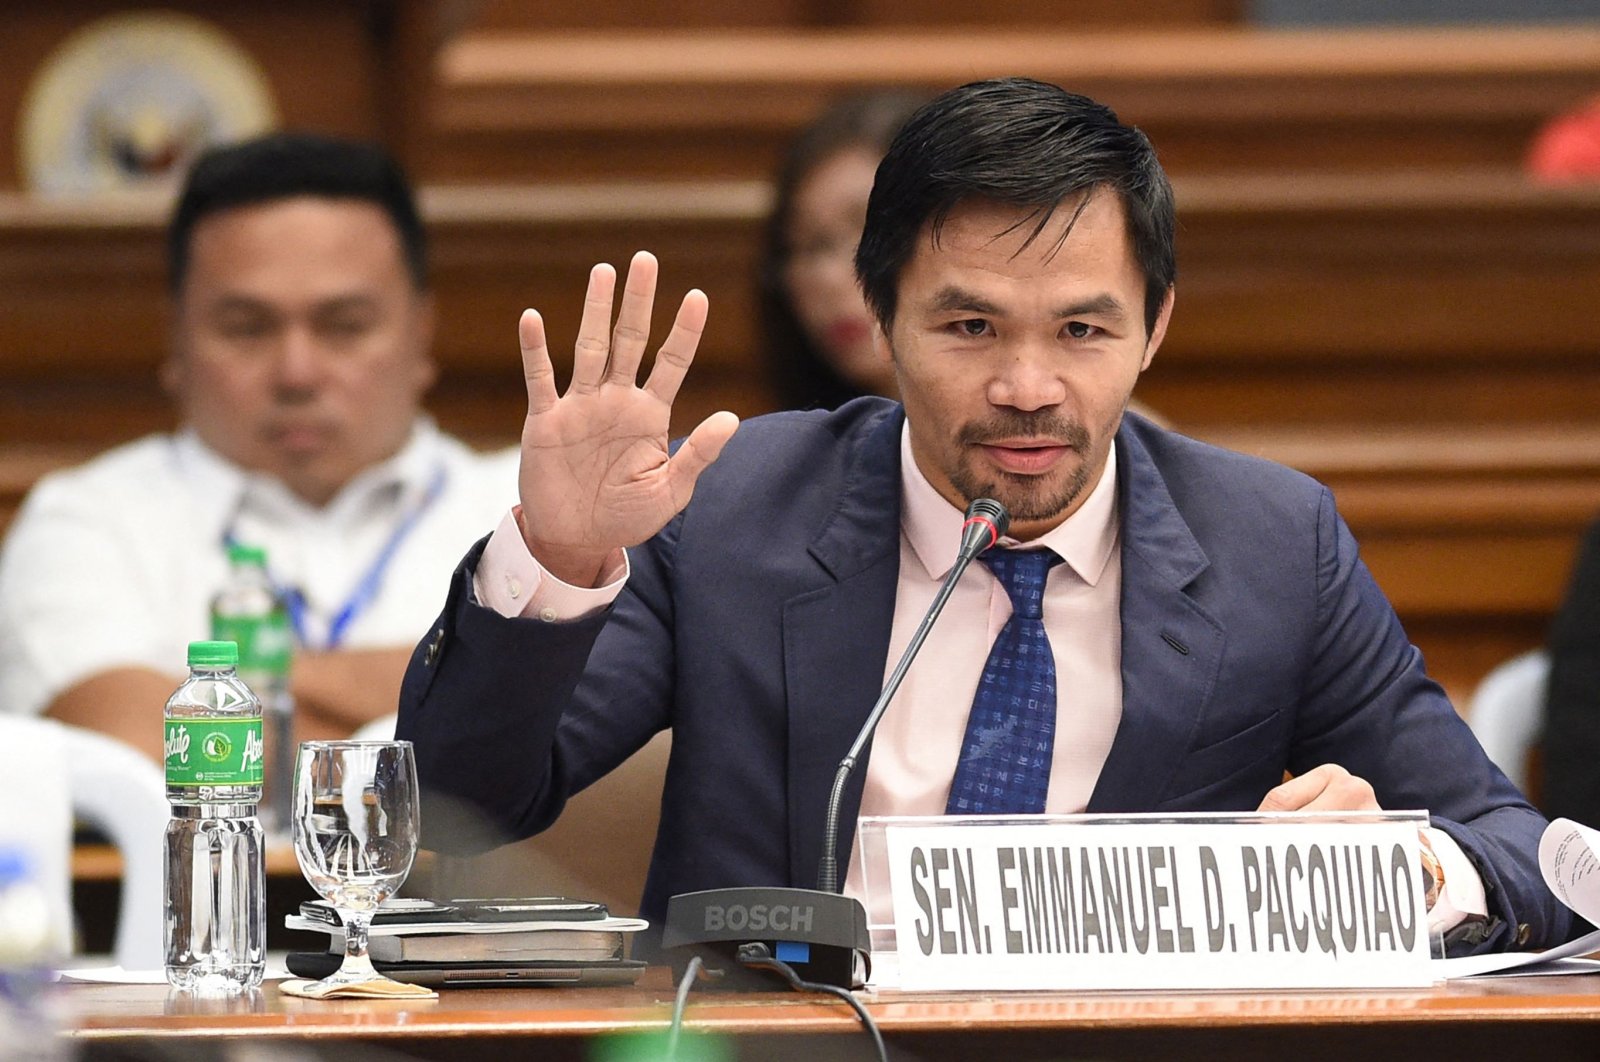 Philippine boxing icon and senator, Manny Pacquiao, during a senate hearing in Manila, the Philippines, March 6, 2017. (AFP Photo)